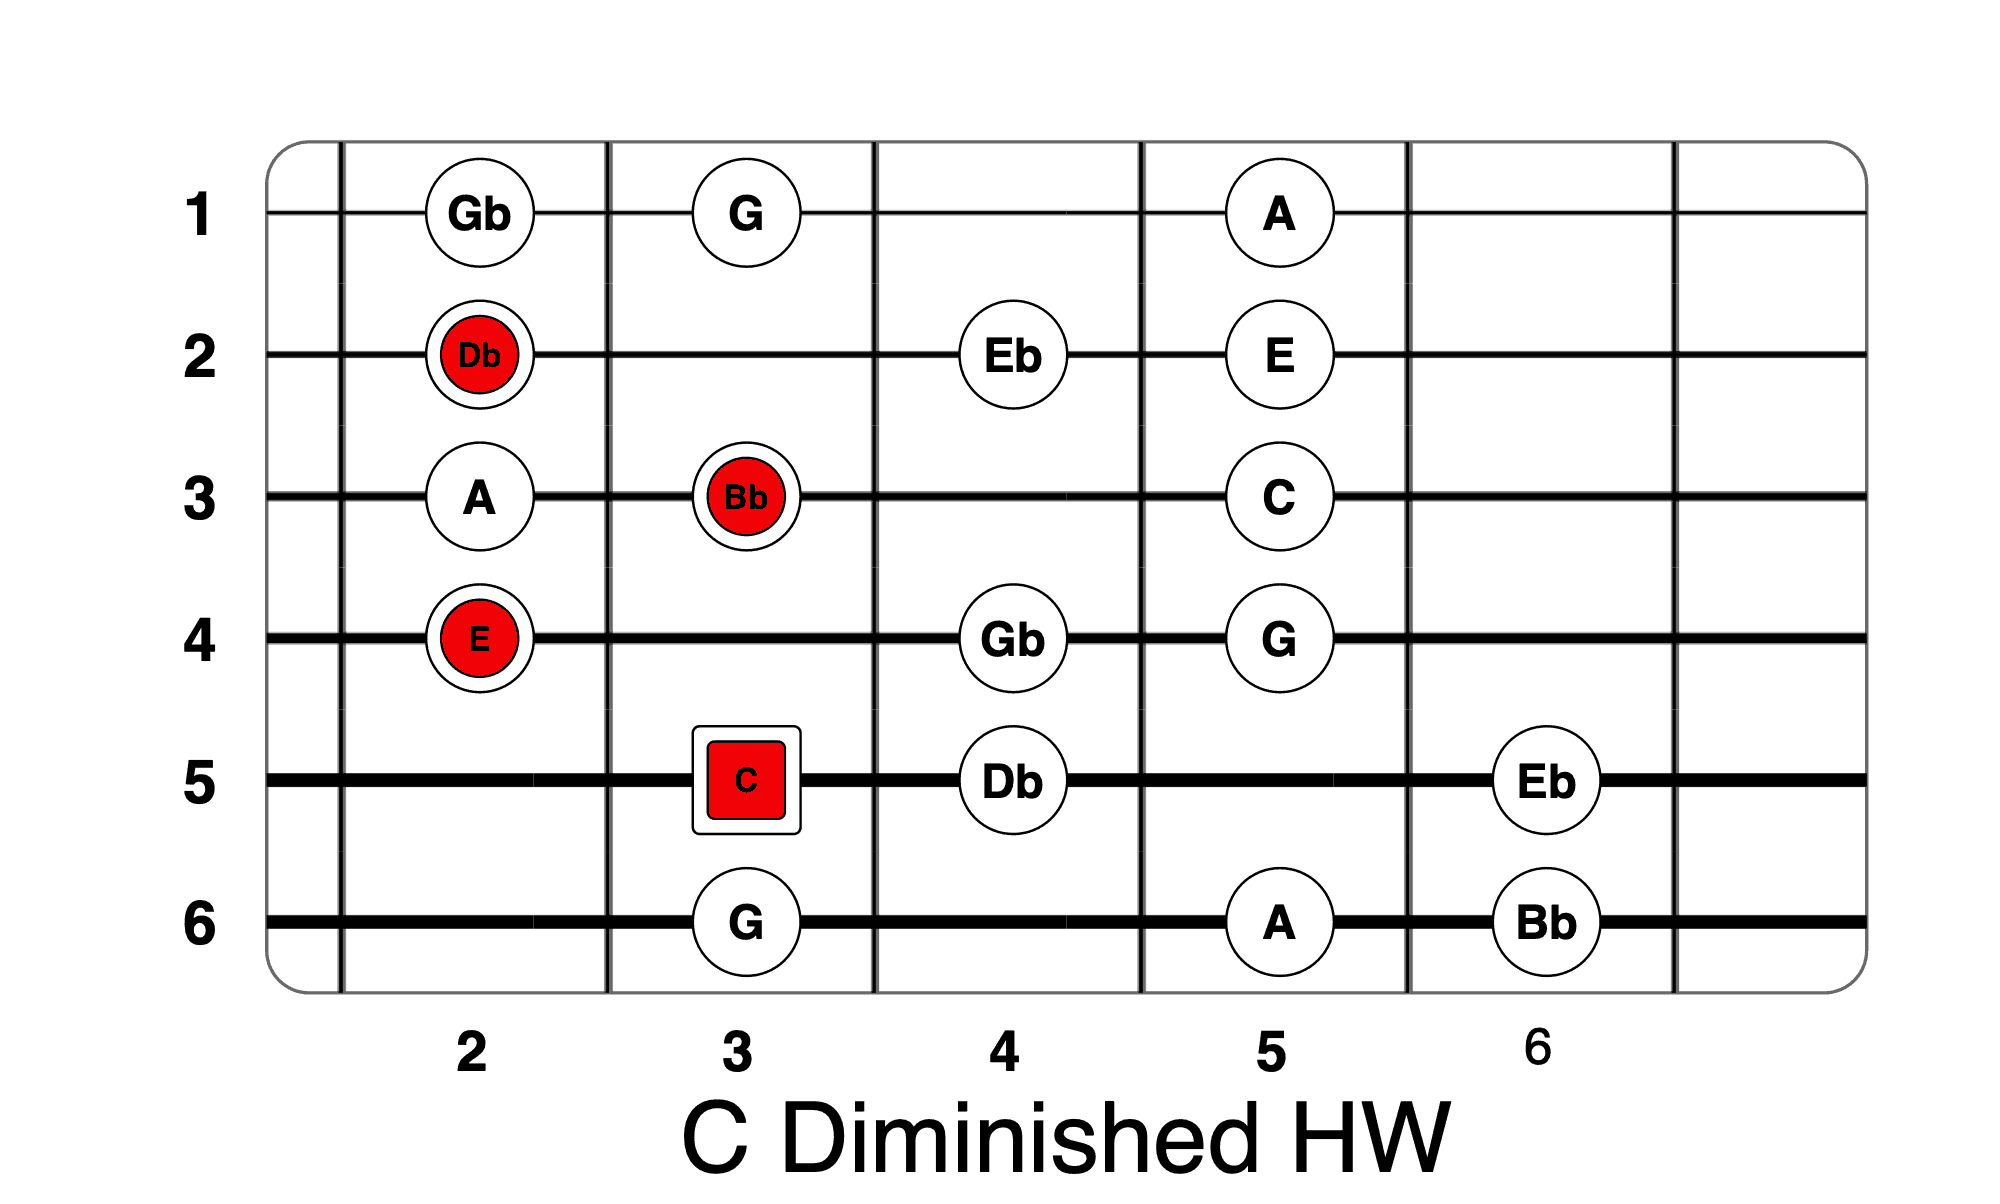 c-diminished-half-whole-life-in-12-keys